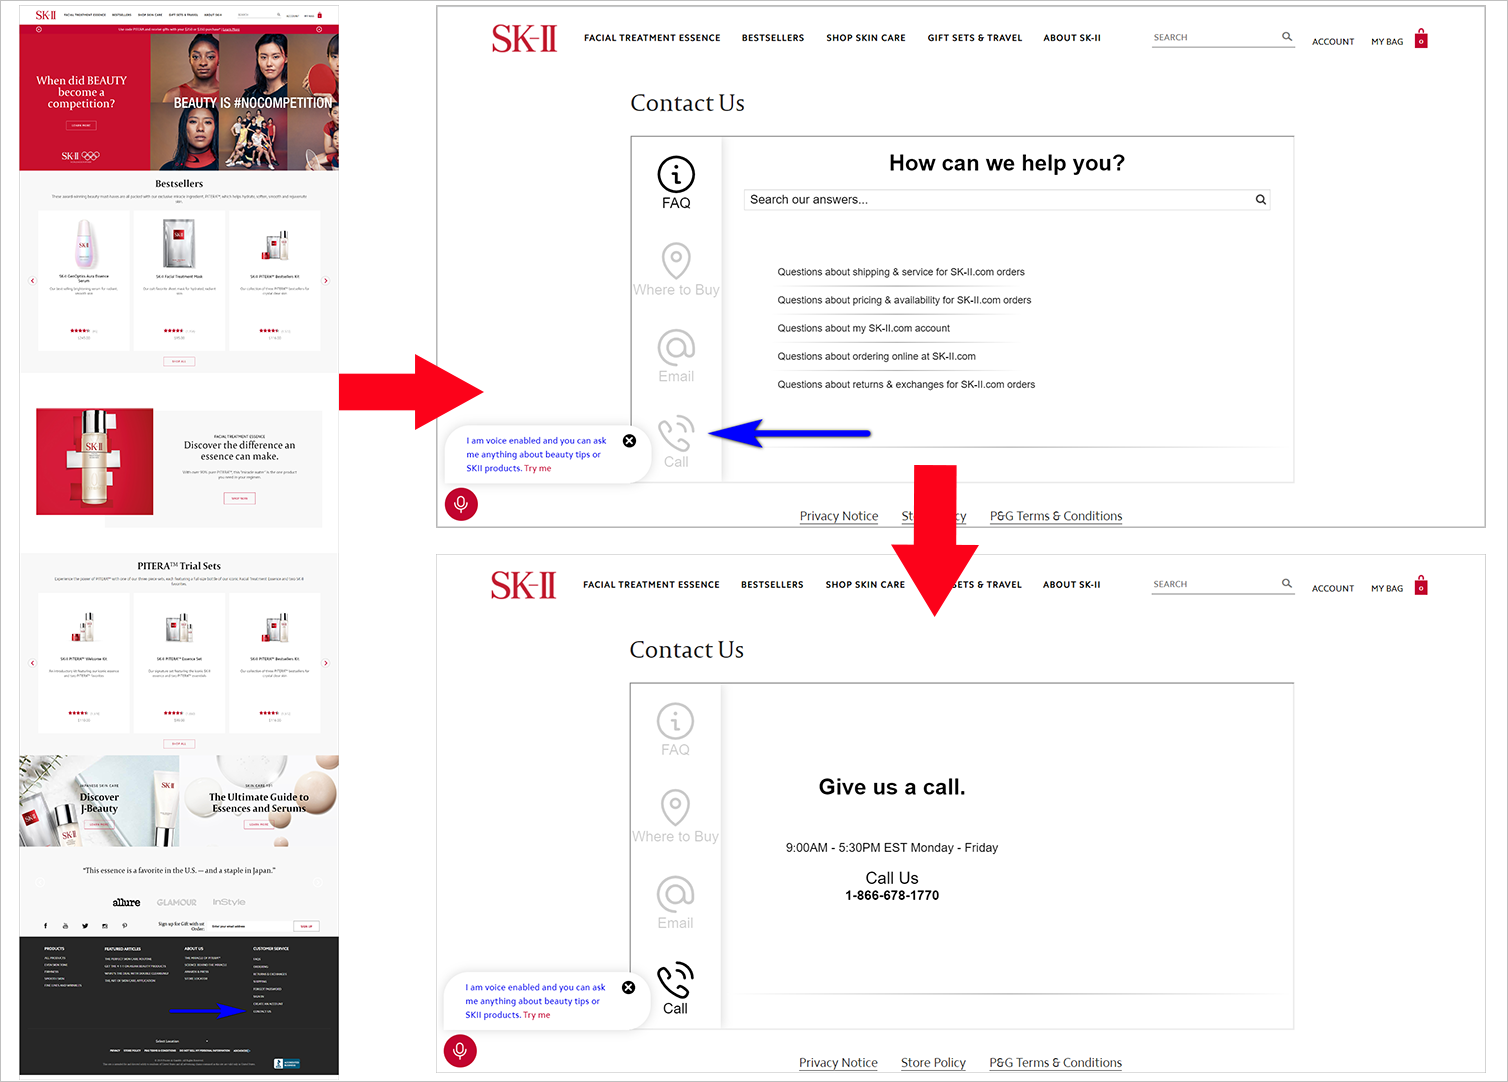 reduce cognitive load: availability example - on the left side is an image of SK-II.com's homepage with the "contact us" link on the footer. on the right side, at the top, is an image of SK-II.com's "contact us" page, with a subdued phone icon with a "call" label at the bottom left side of the page. the image on the bottom right side is still the "contact us" page but with the "call" section activated - the page has the customer service's availability hours and phone number